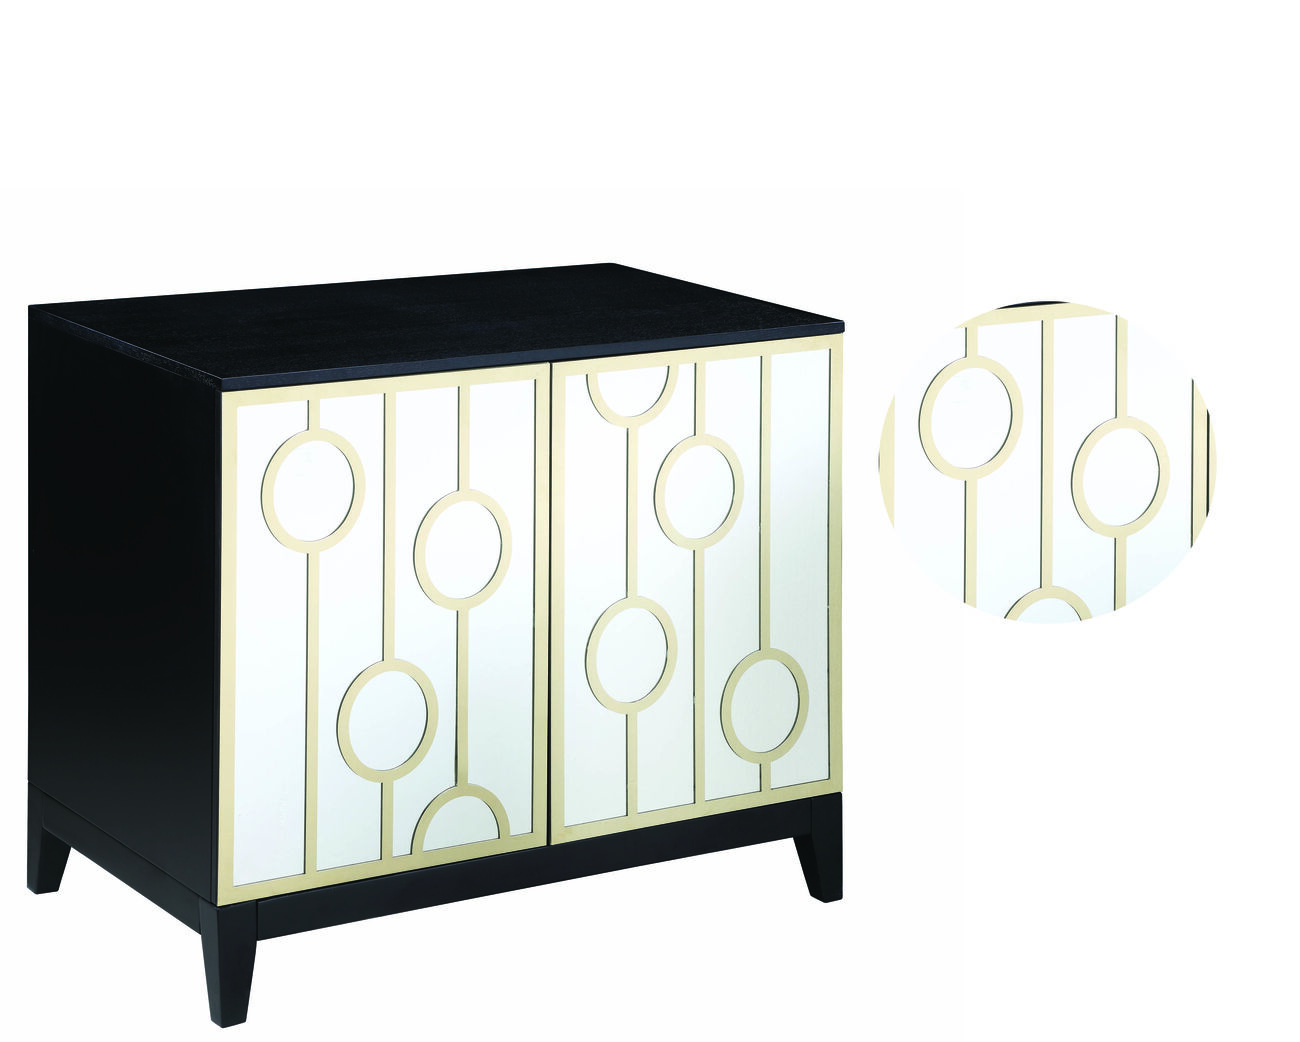 Wood and Metal Server with Mirrored Doors and Geometric Designs, Black and Gold